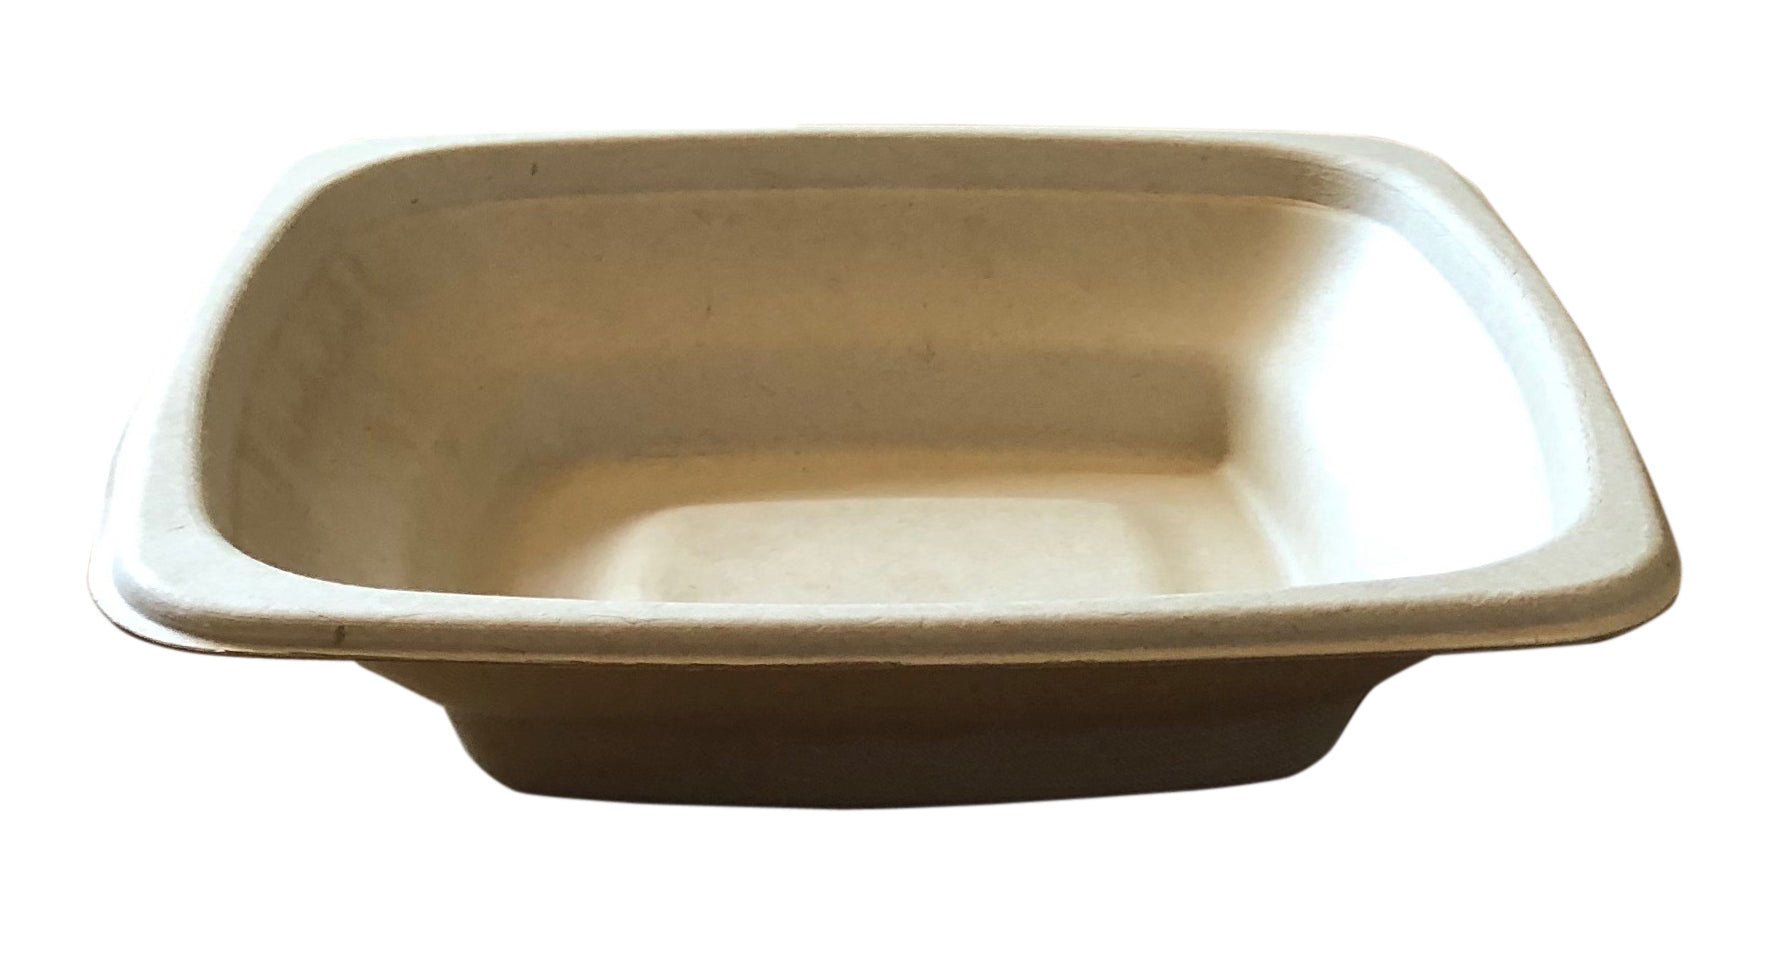 Biodegradable Bowls for Parties